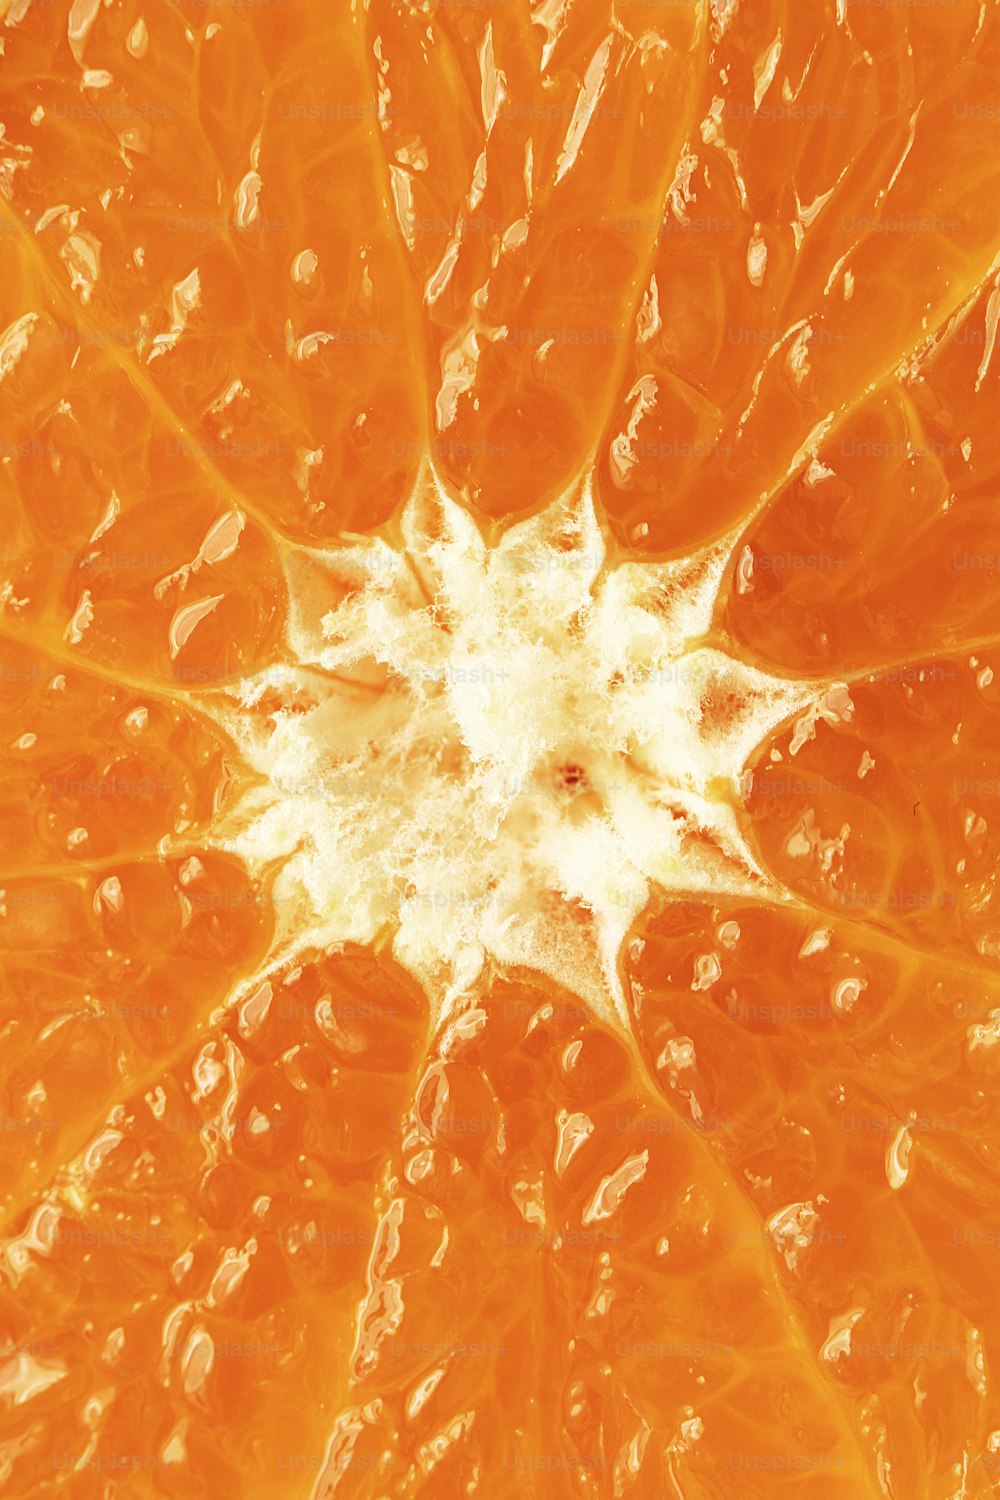 a close up of an orange with drops of water on it